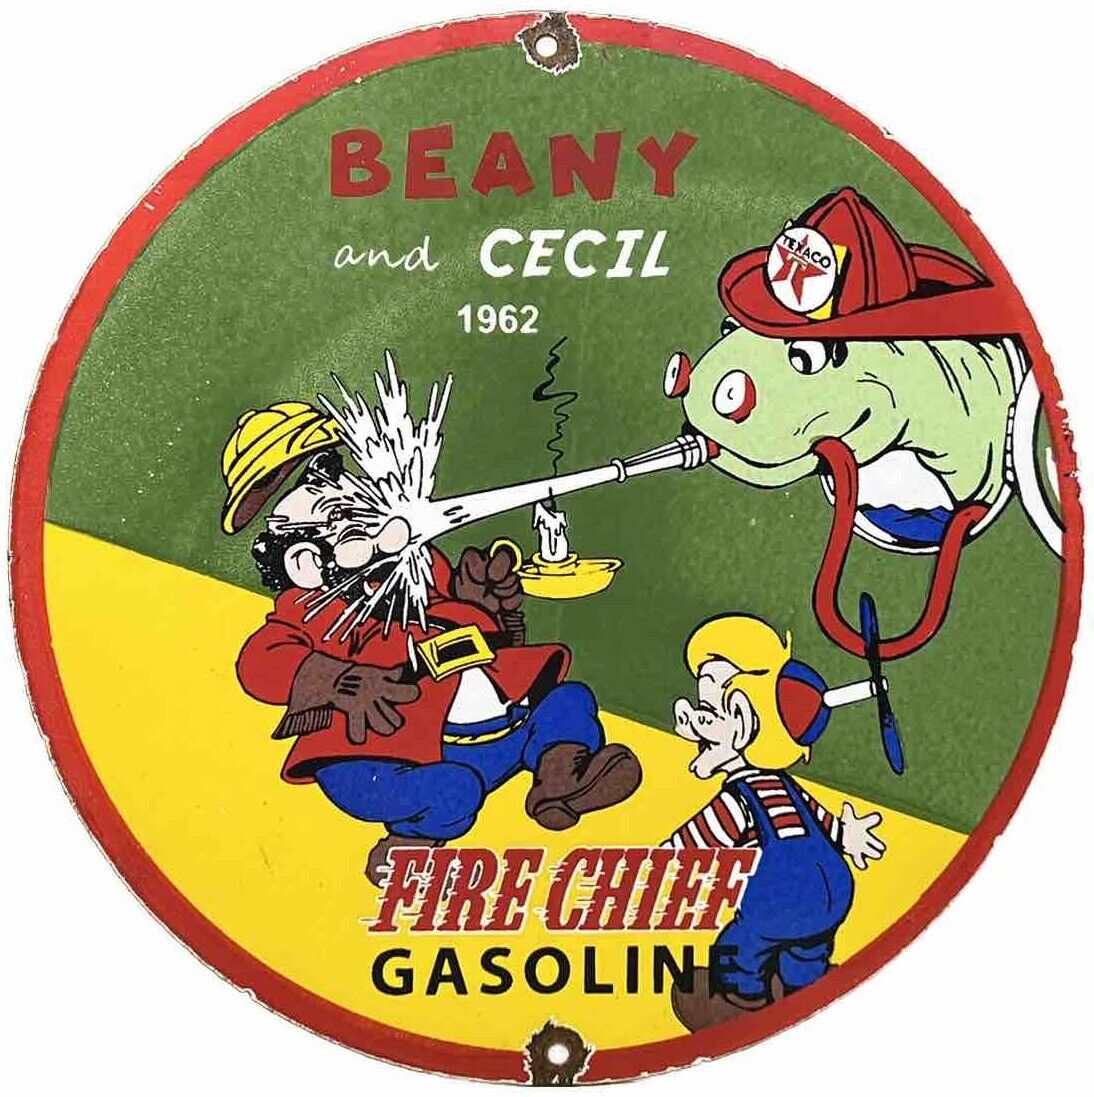 VINTAGE TEXACO FIRE CHIEF GASOLINE PORCELAIN SIGN GAS OIL PUMP PLATE BEANY CECIL